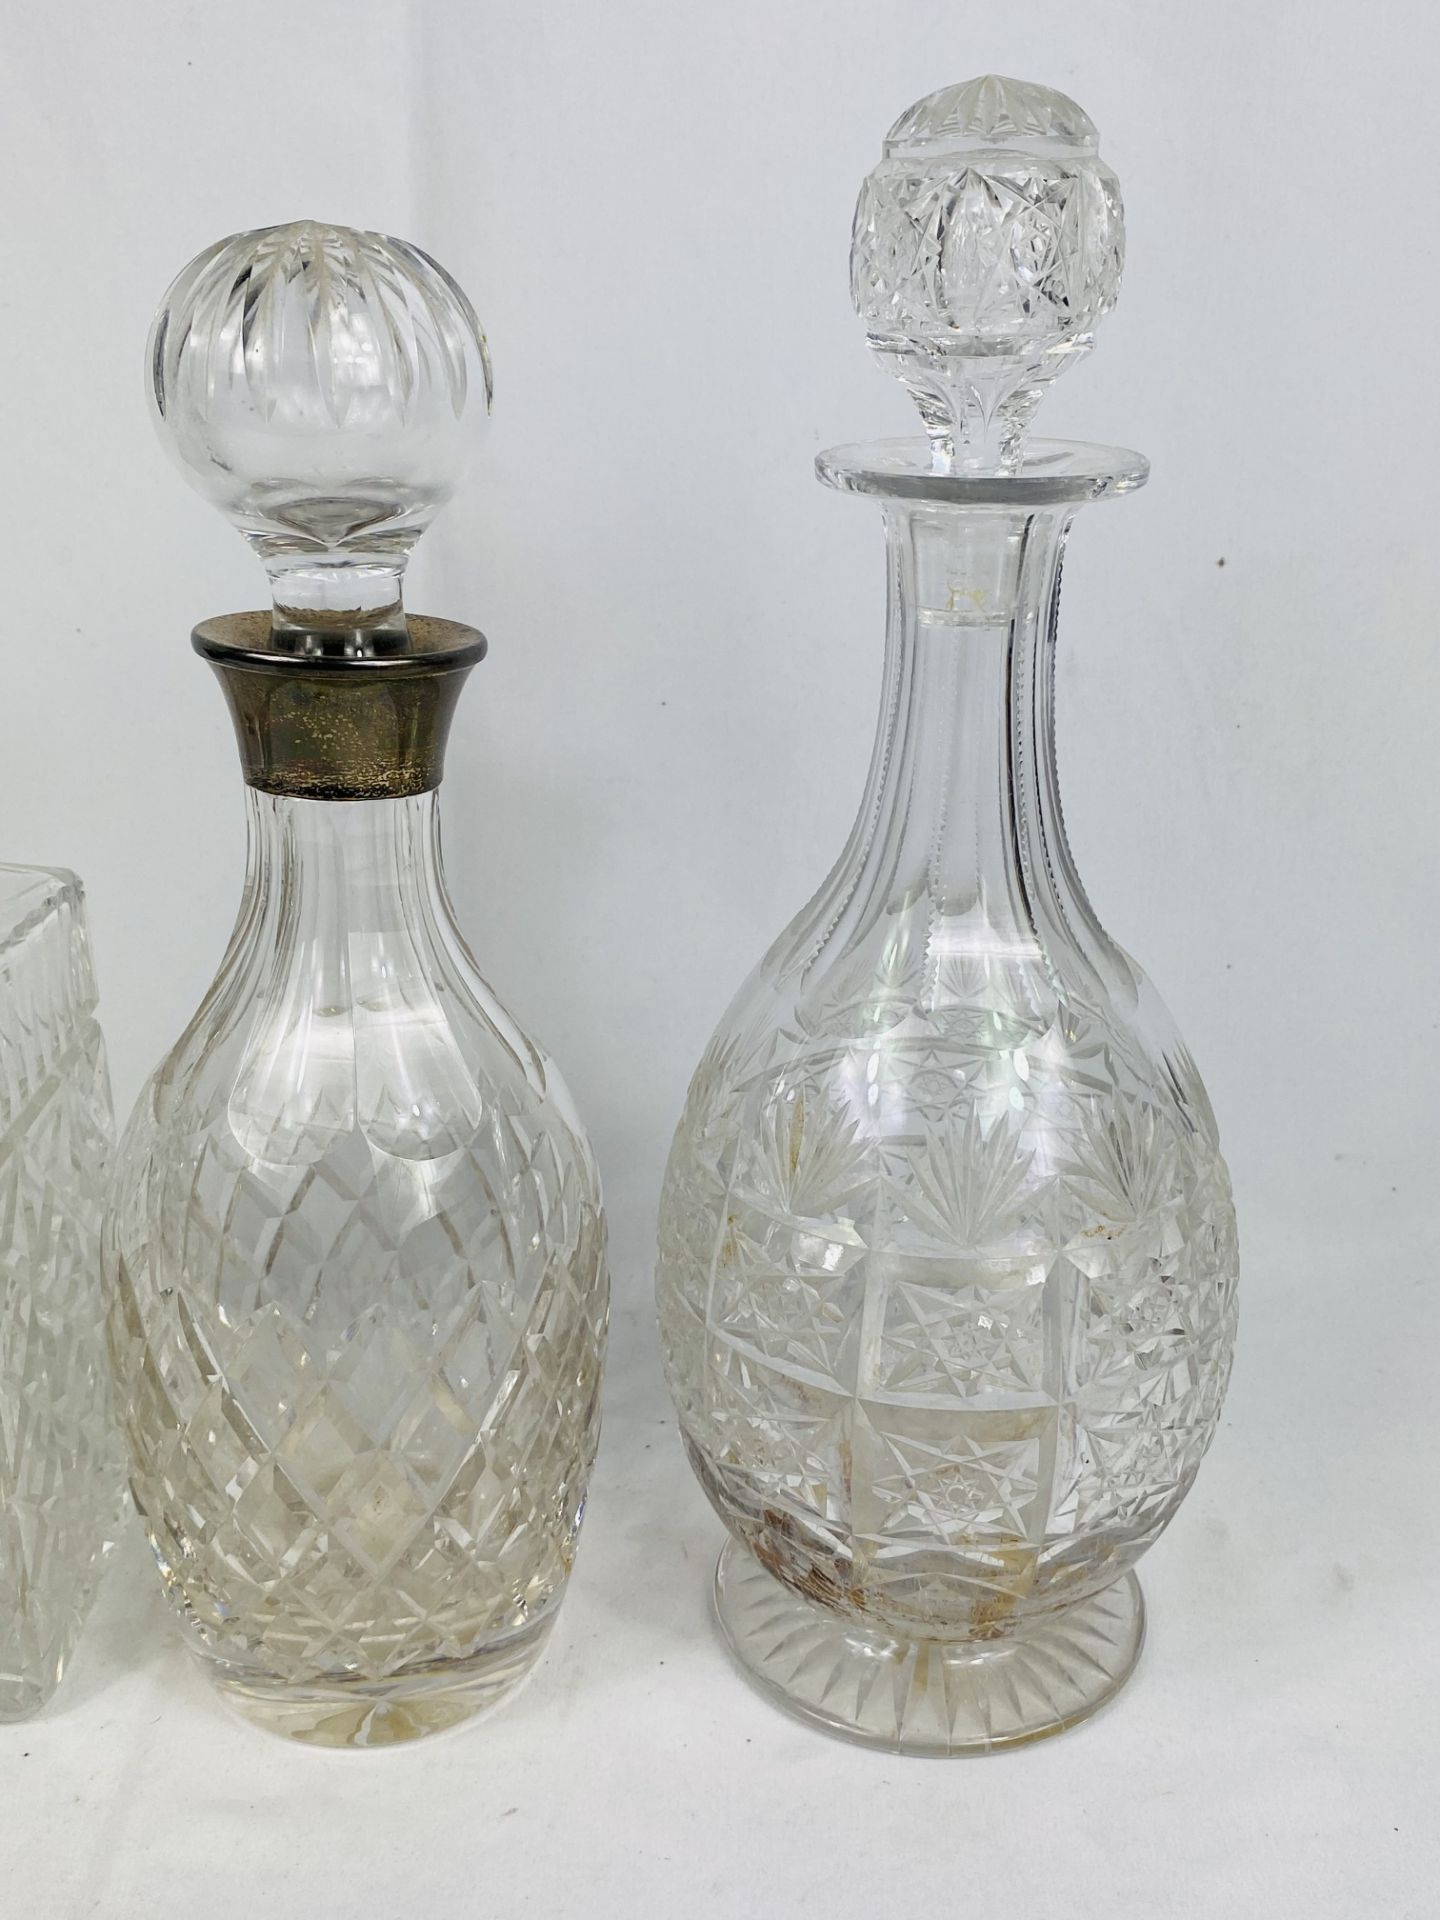 Two cut glass decanters with silver collars and a cut glass decanter - Image 2 of 3